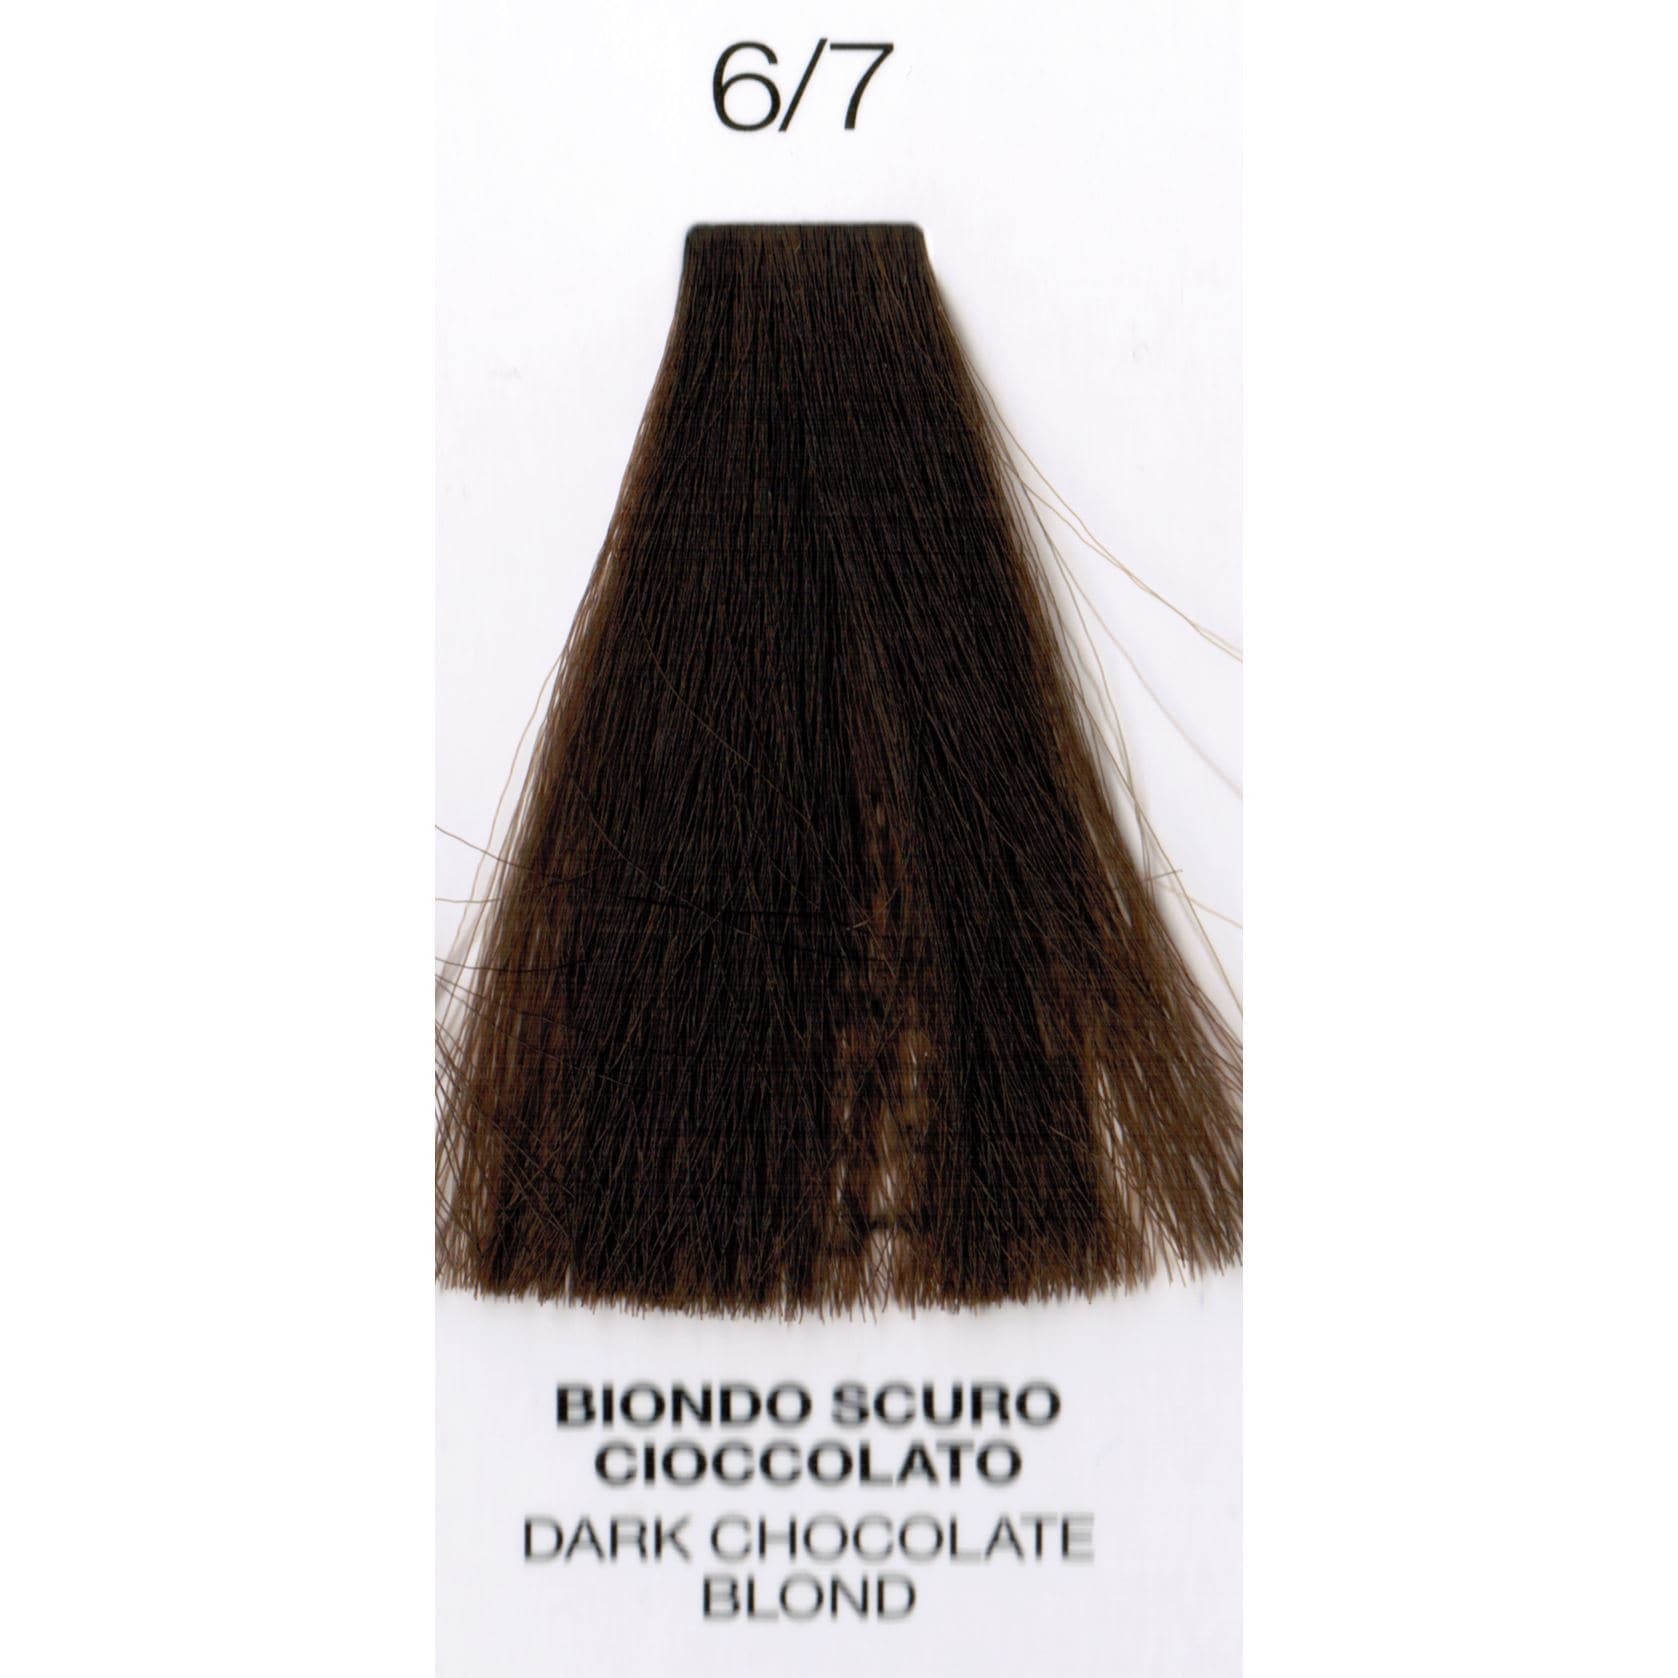 6/7 Dark Cocoa Blonde | Ammonia-Free Permanent Hair Color | Purity | OYSTER - SH Salons